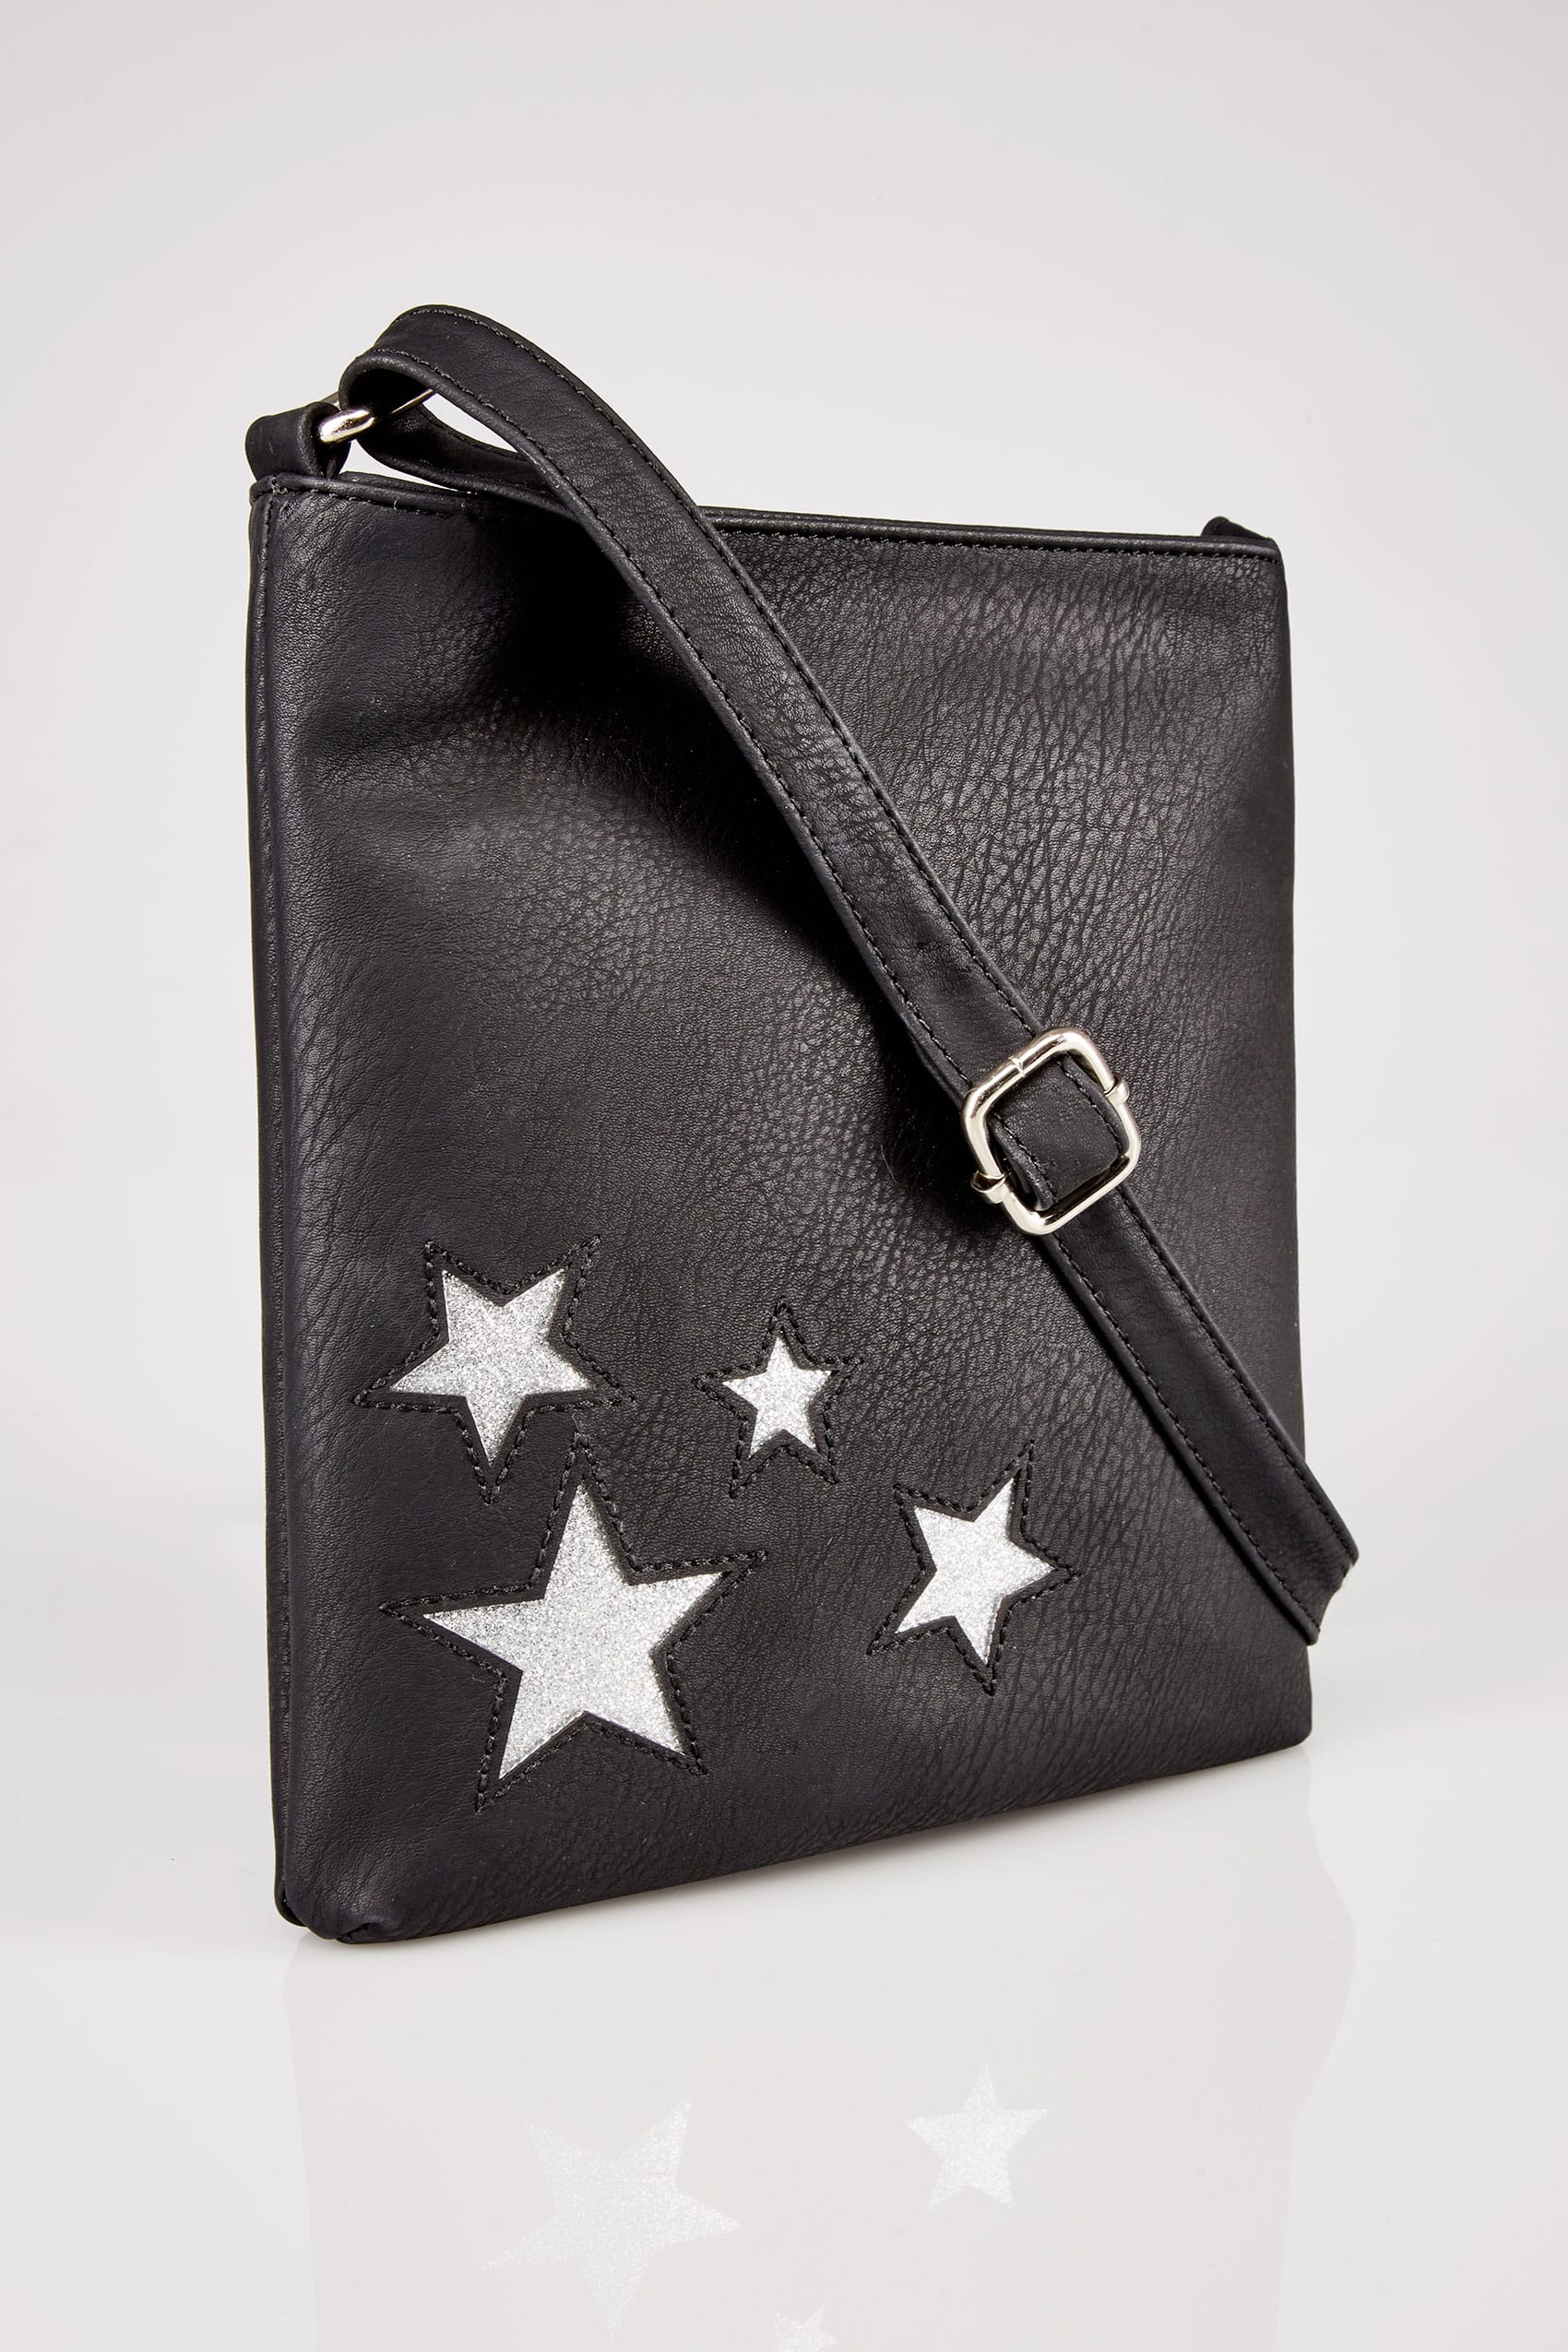 Black Glitter Star Patterned Cross Body Bag With Extended Strap